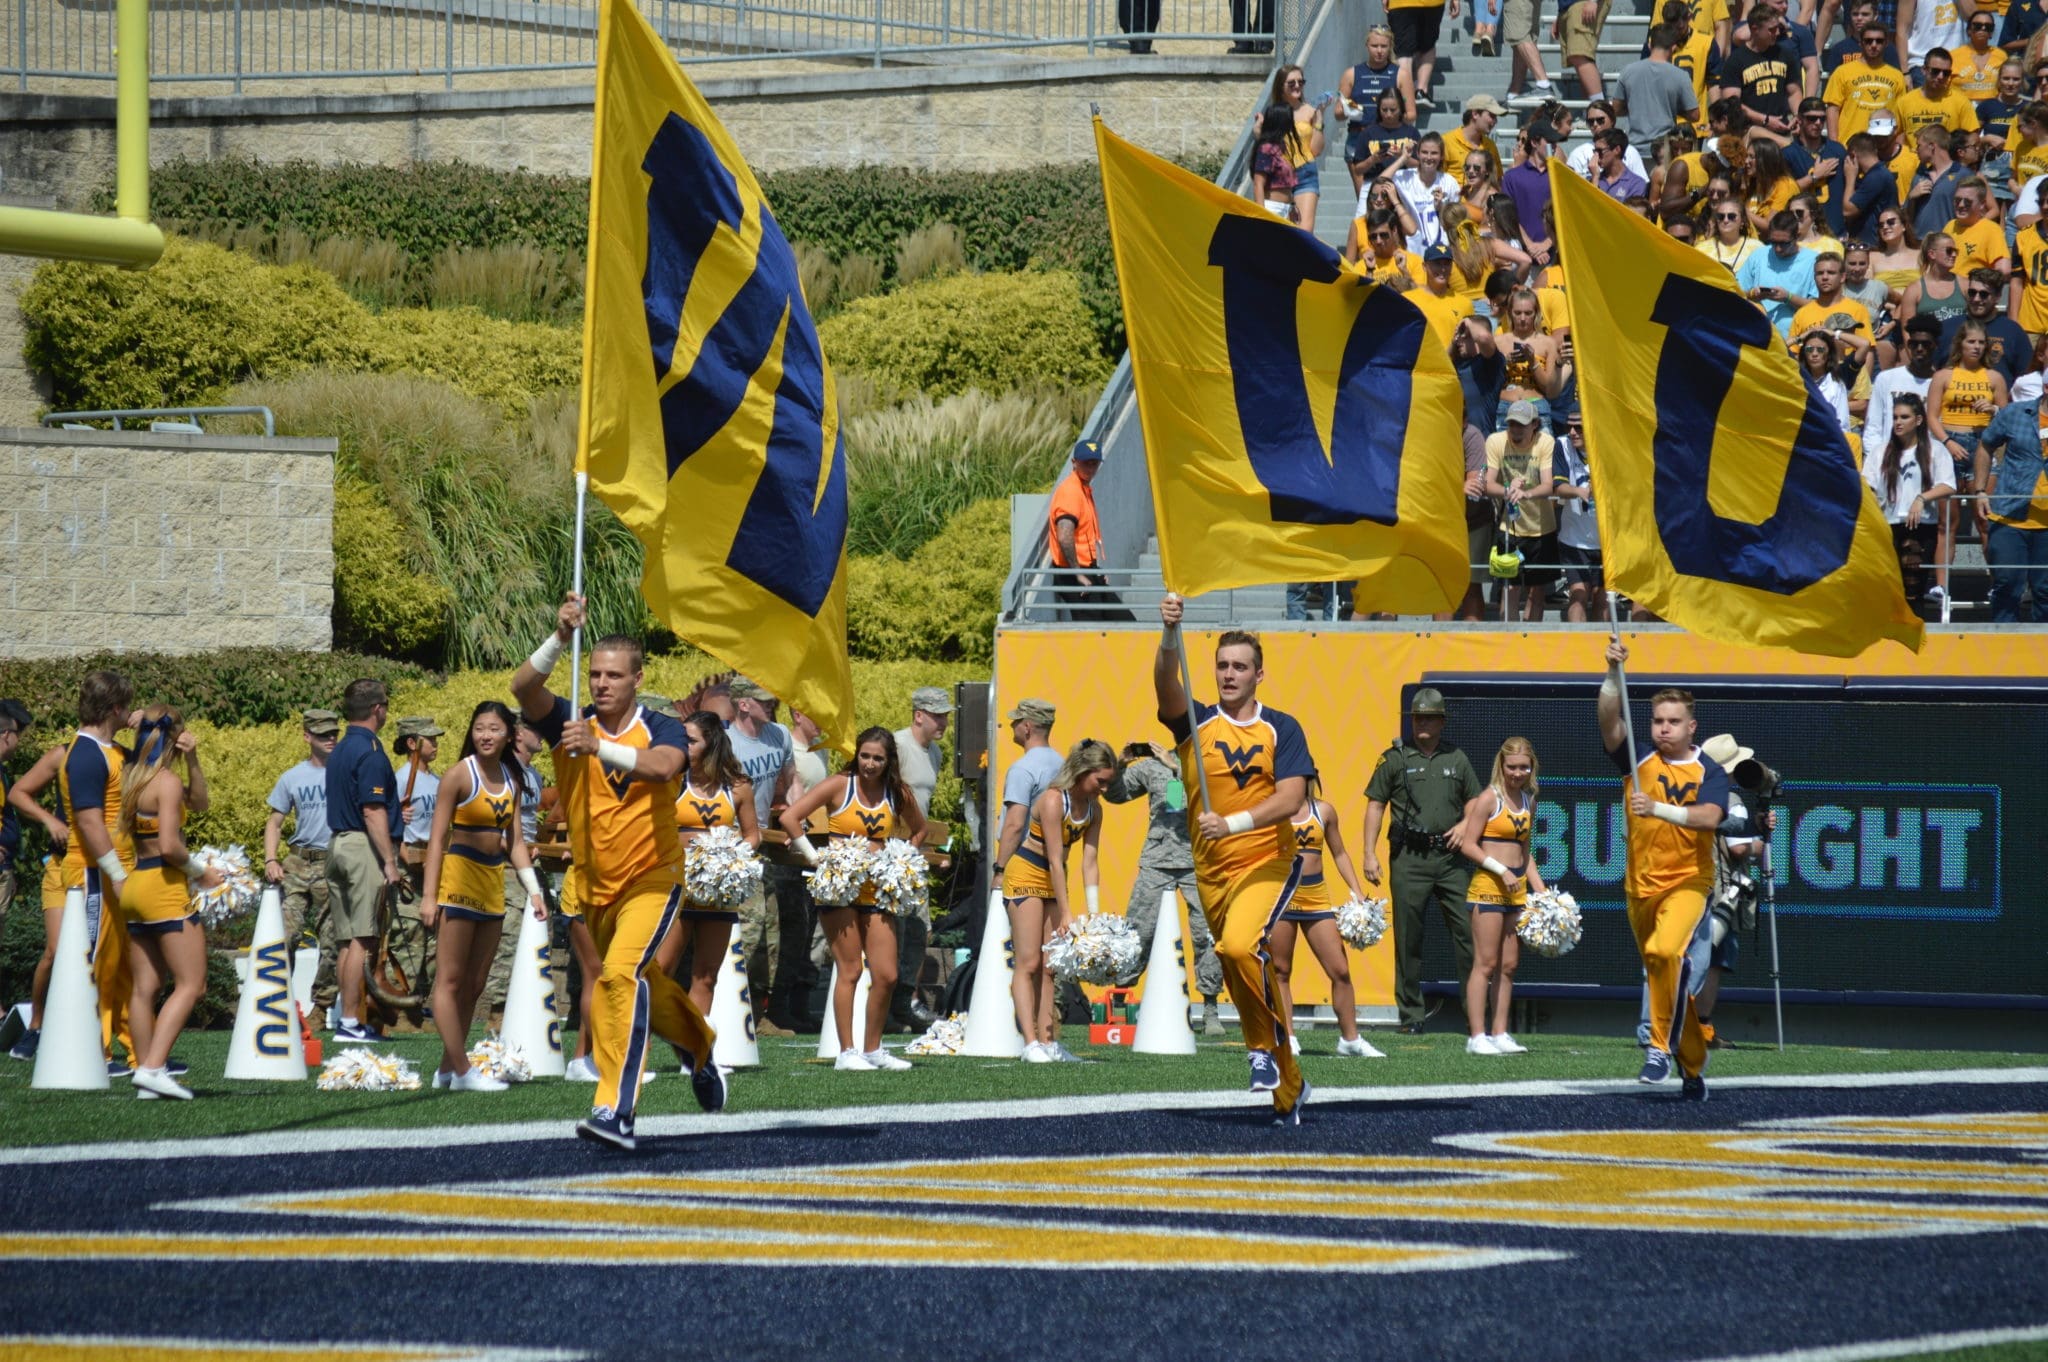 WVU football flags in end zone